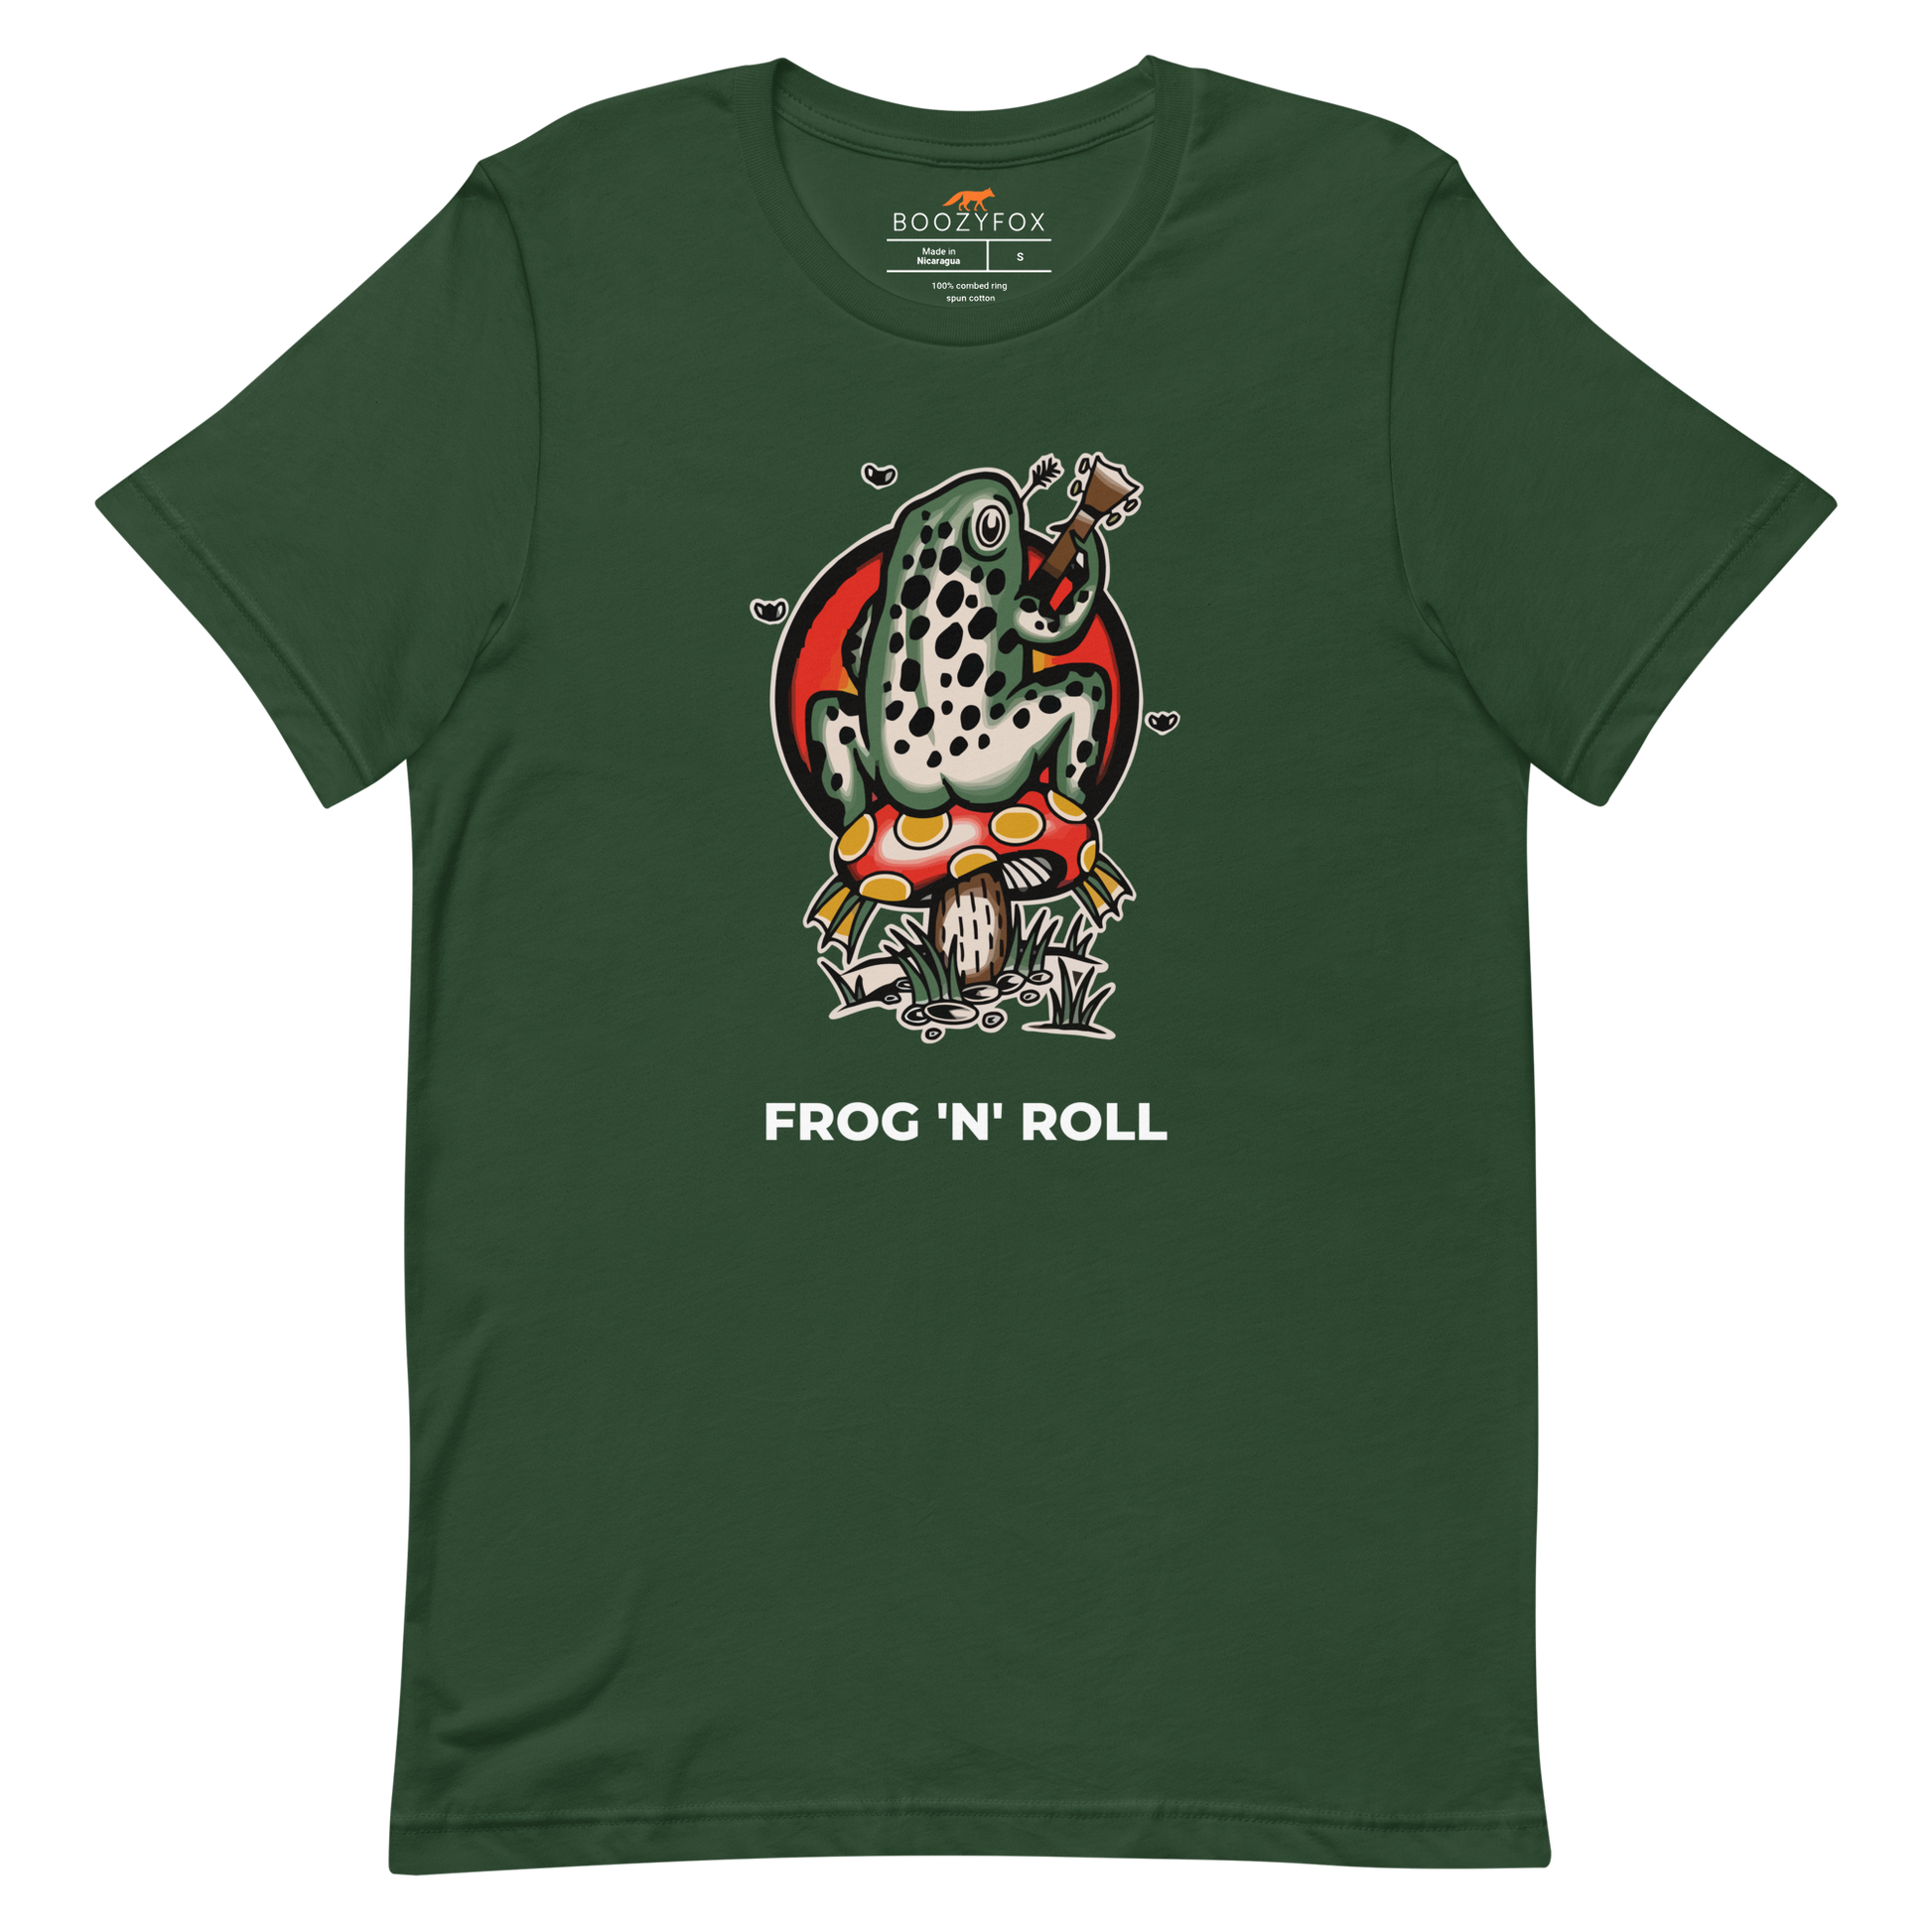 Forest Green Premium Frog Tee featuring a funny Frog 'n' Roll graphic on the chest - Funny Graphic Frog Tees - Boozy Fox